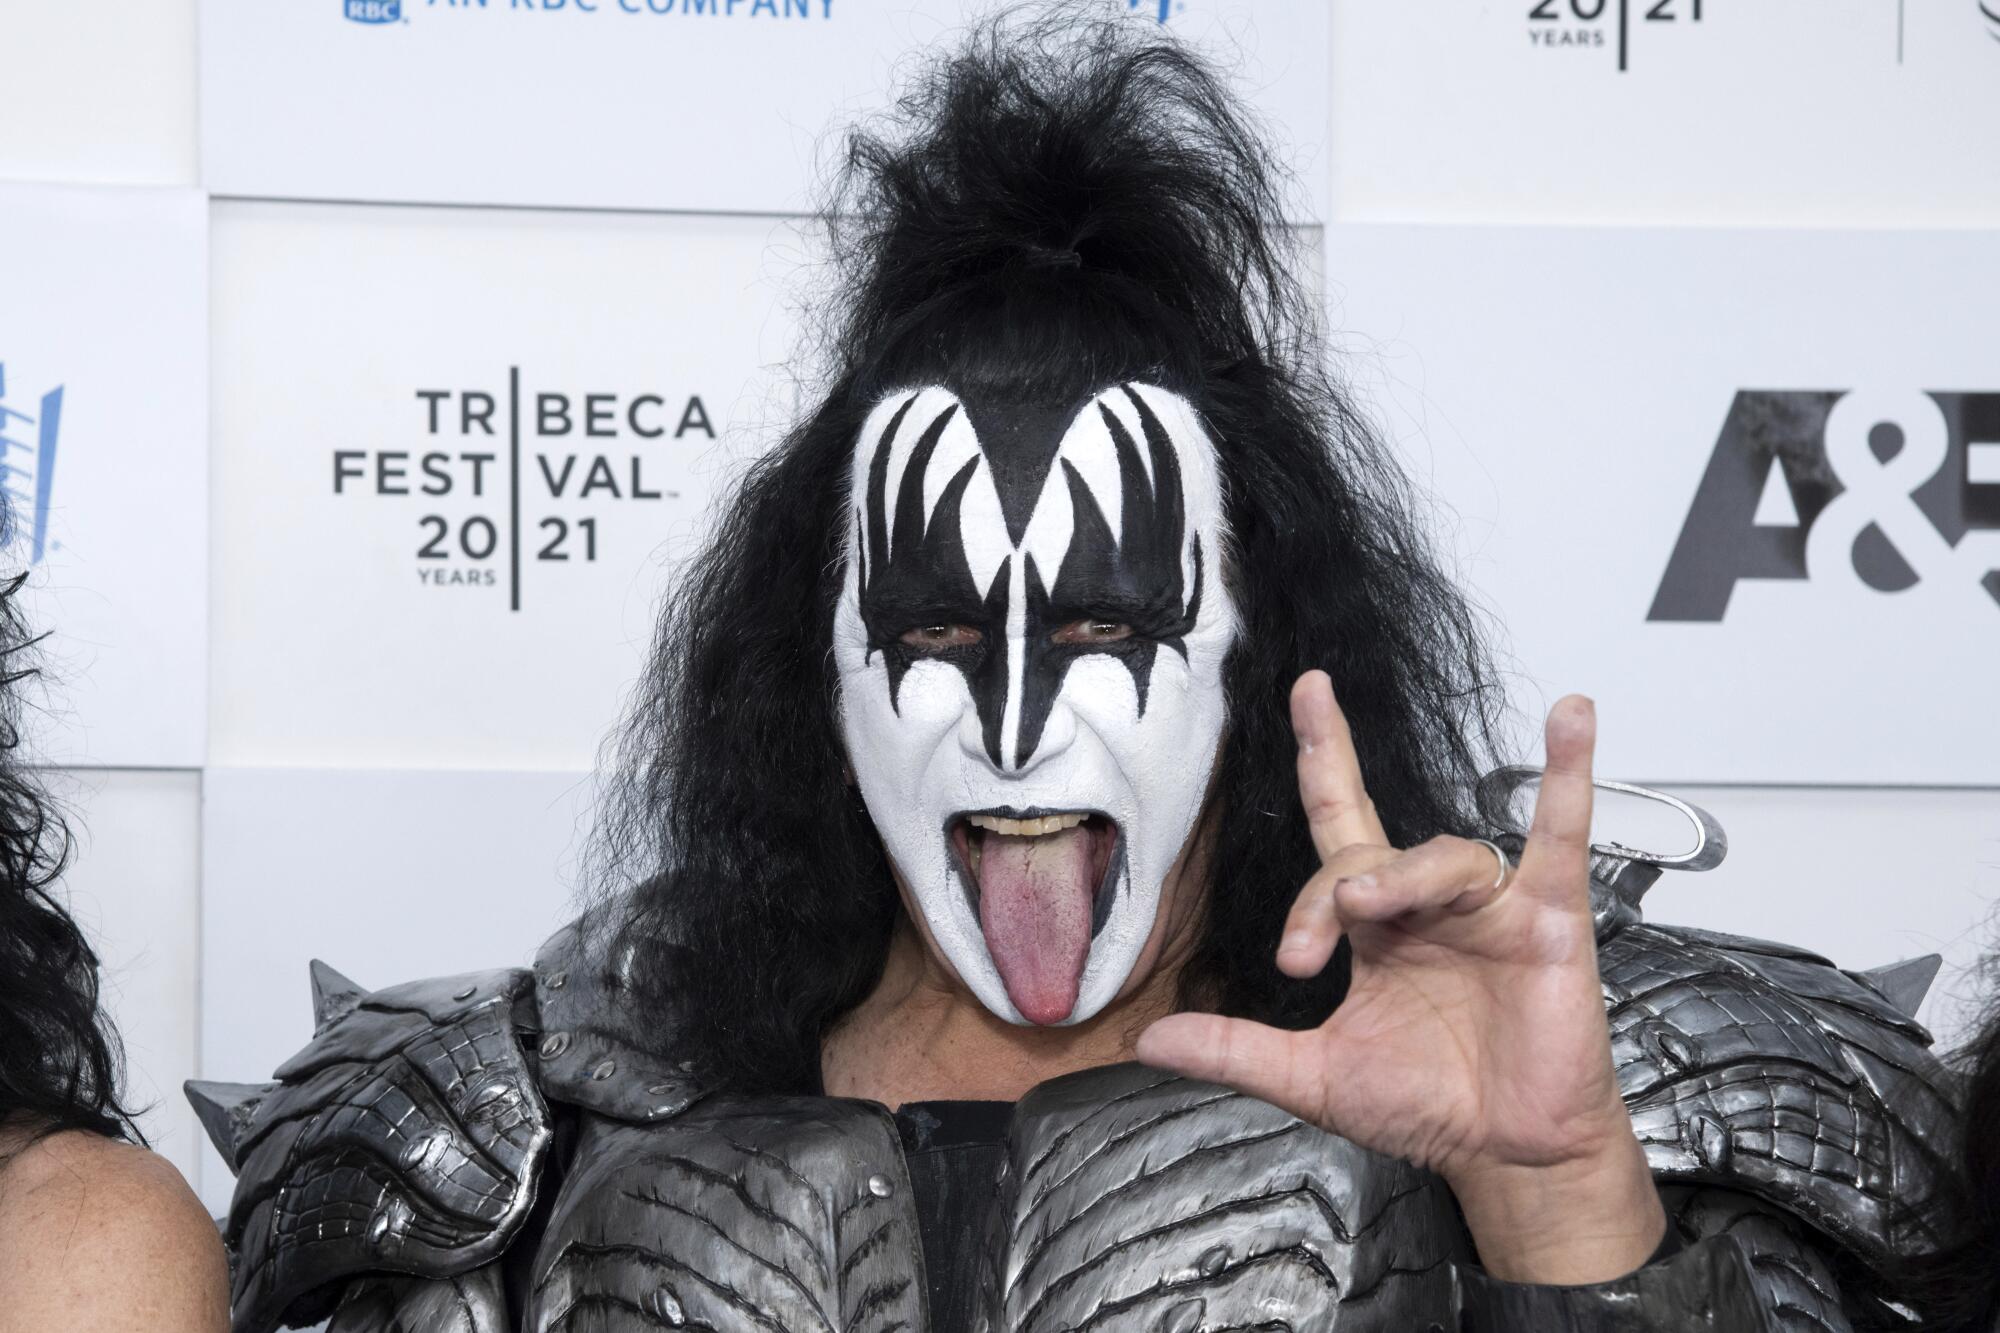 Gene Simmons wears full Kiss makeup while sticking out his tongue and making a rock-and-roll sign with his left hand